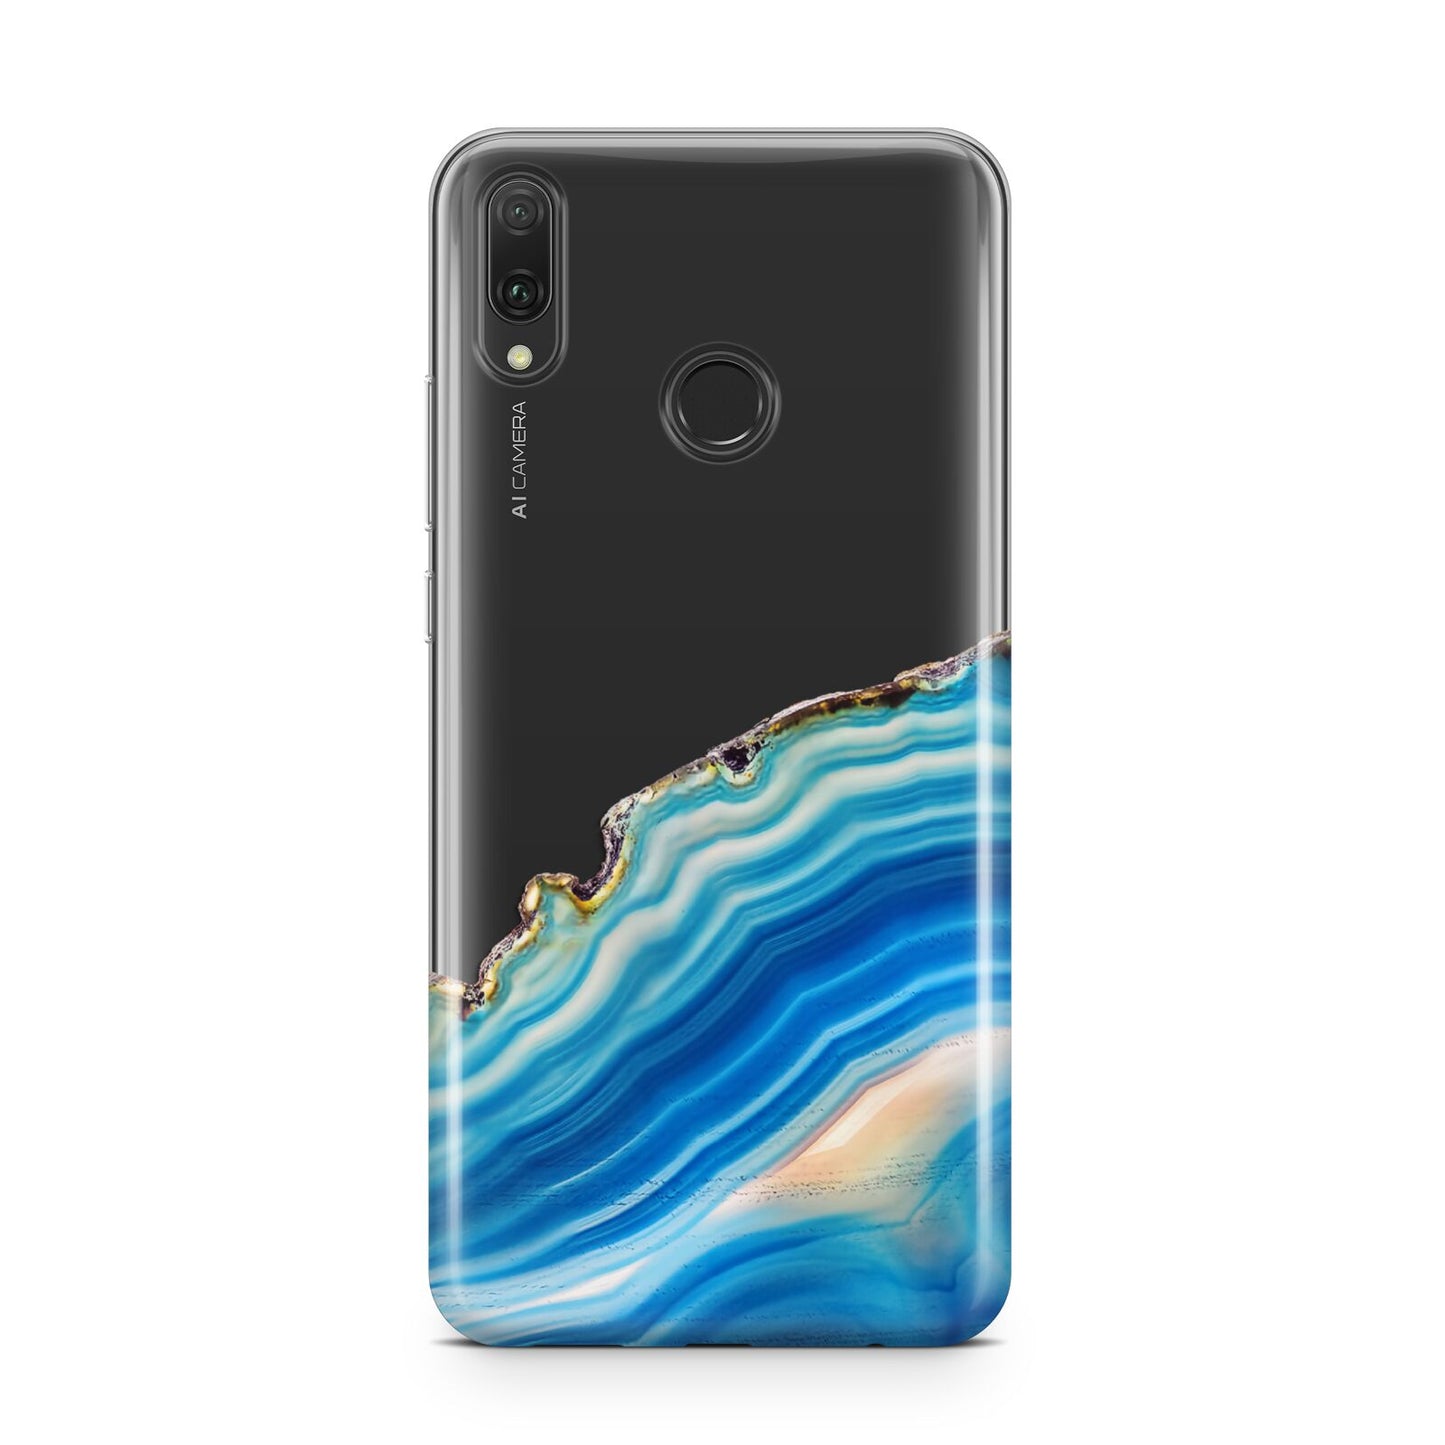 Agate Pale Blue and Bright Blue Huawei Y9 2019